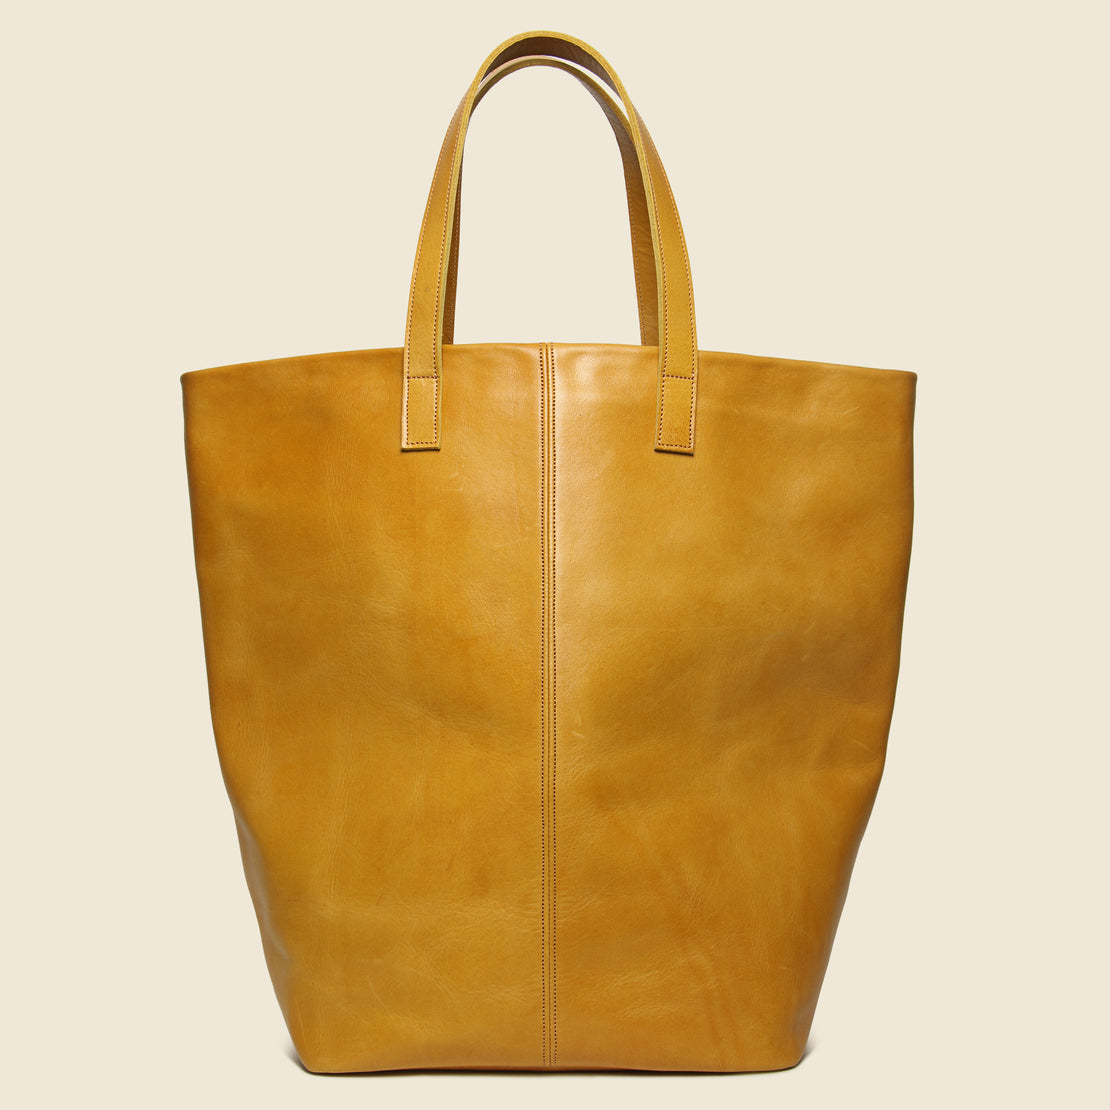 Barracas Leather Tote Bag - Caramel - Nimes - STAG Provisions - W - Accessories - Bag